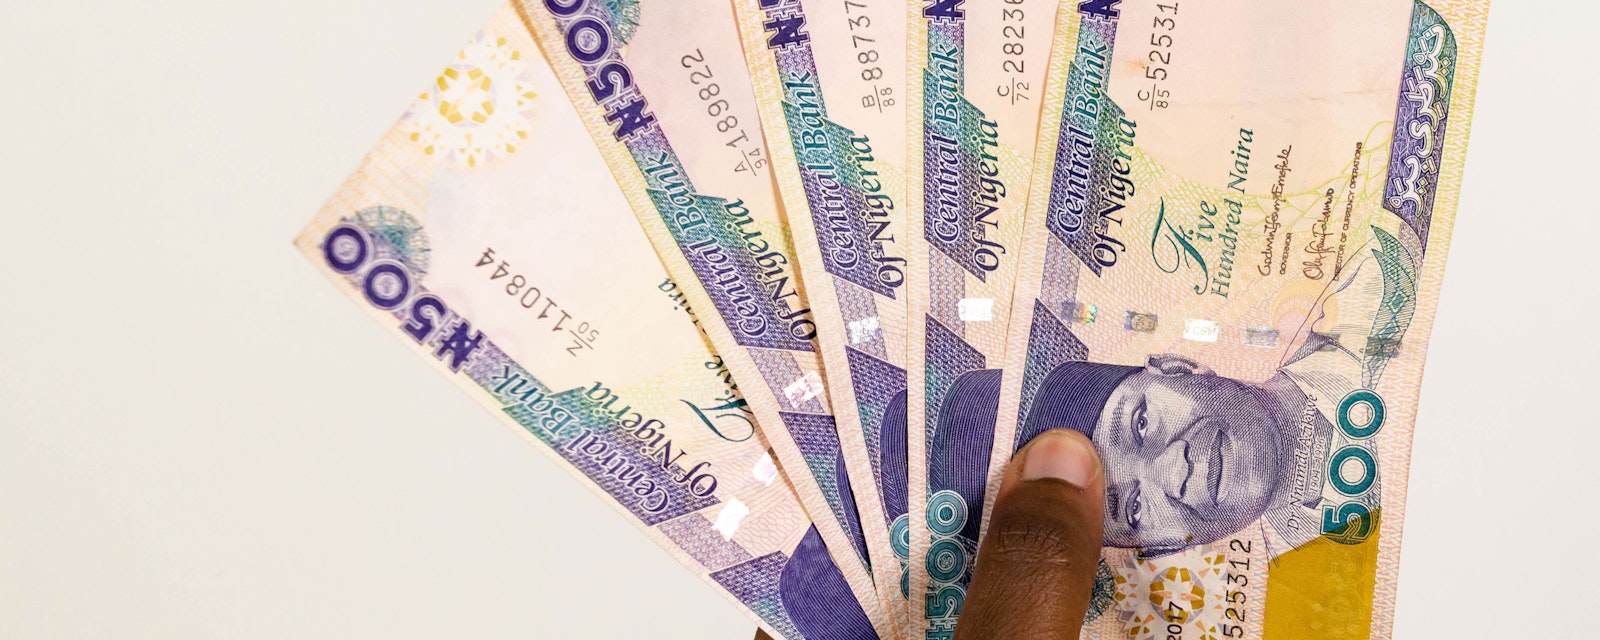 African hand holding Nigerian Naira notes spread